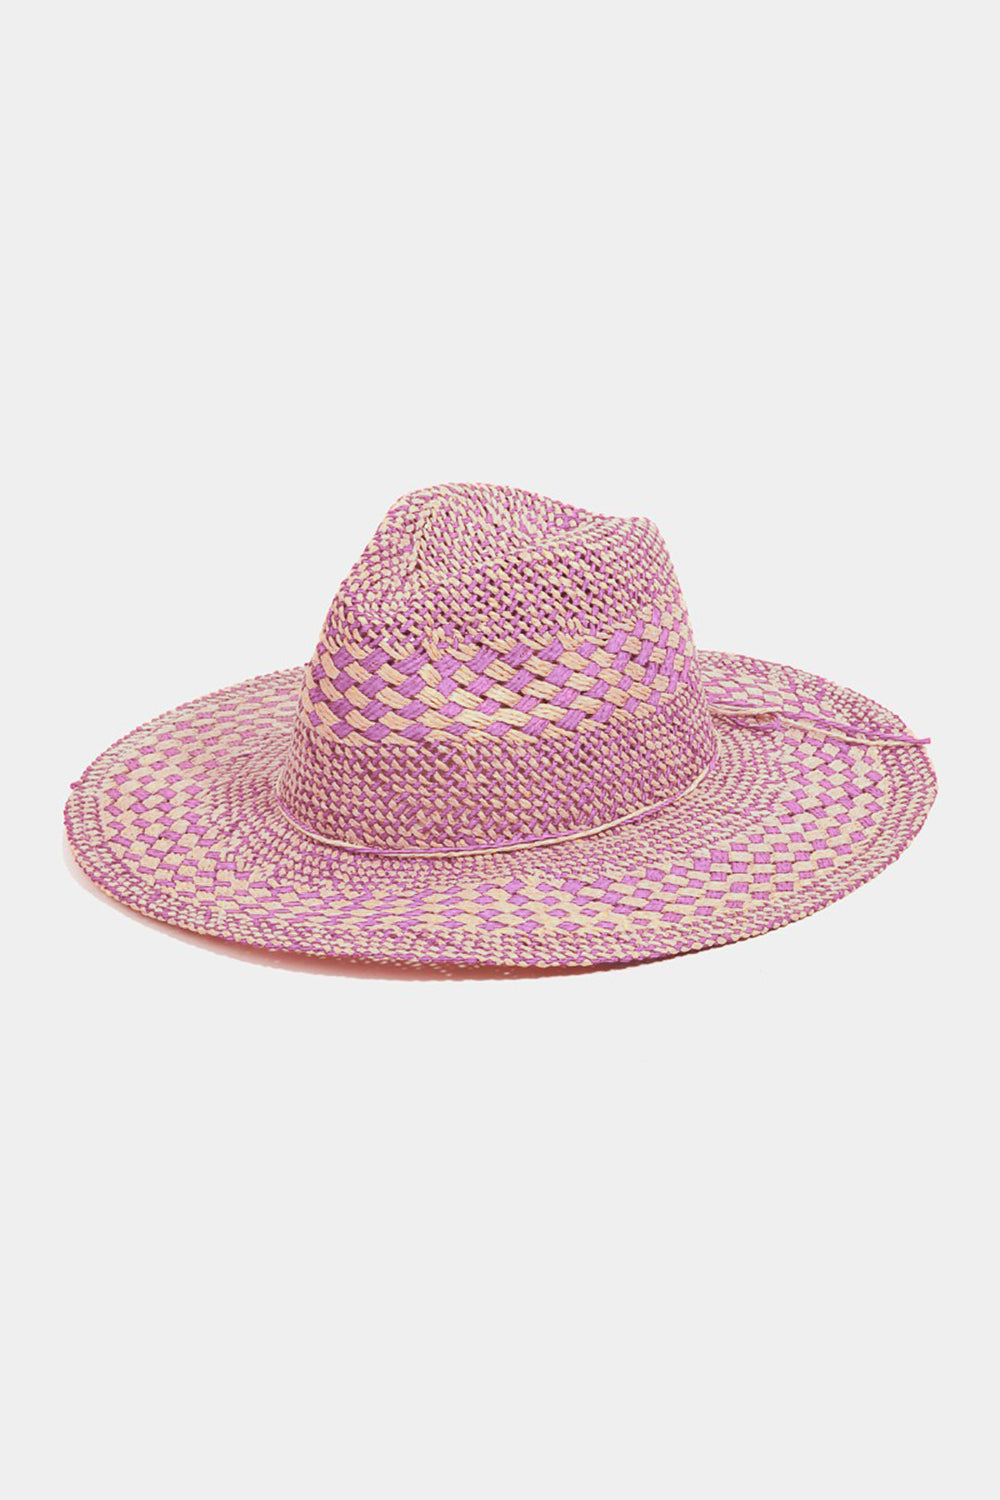 Fame Checkered Straw Weave Sun Hat - Ryzela